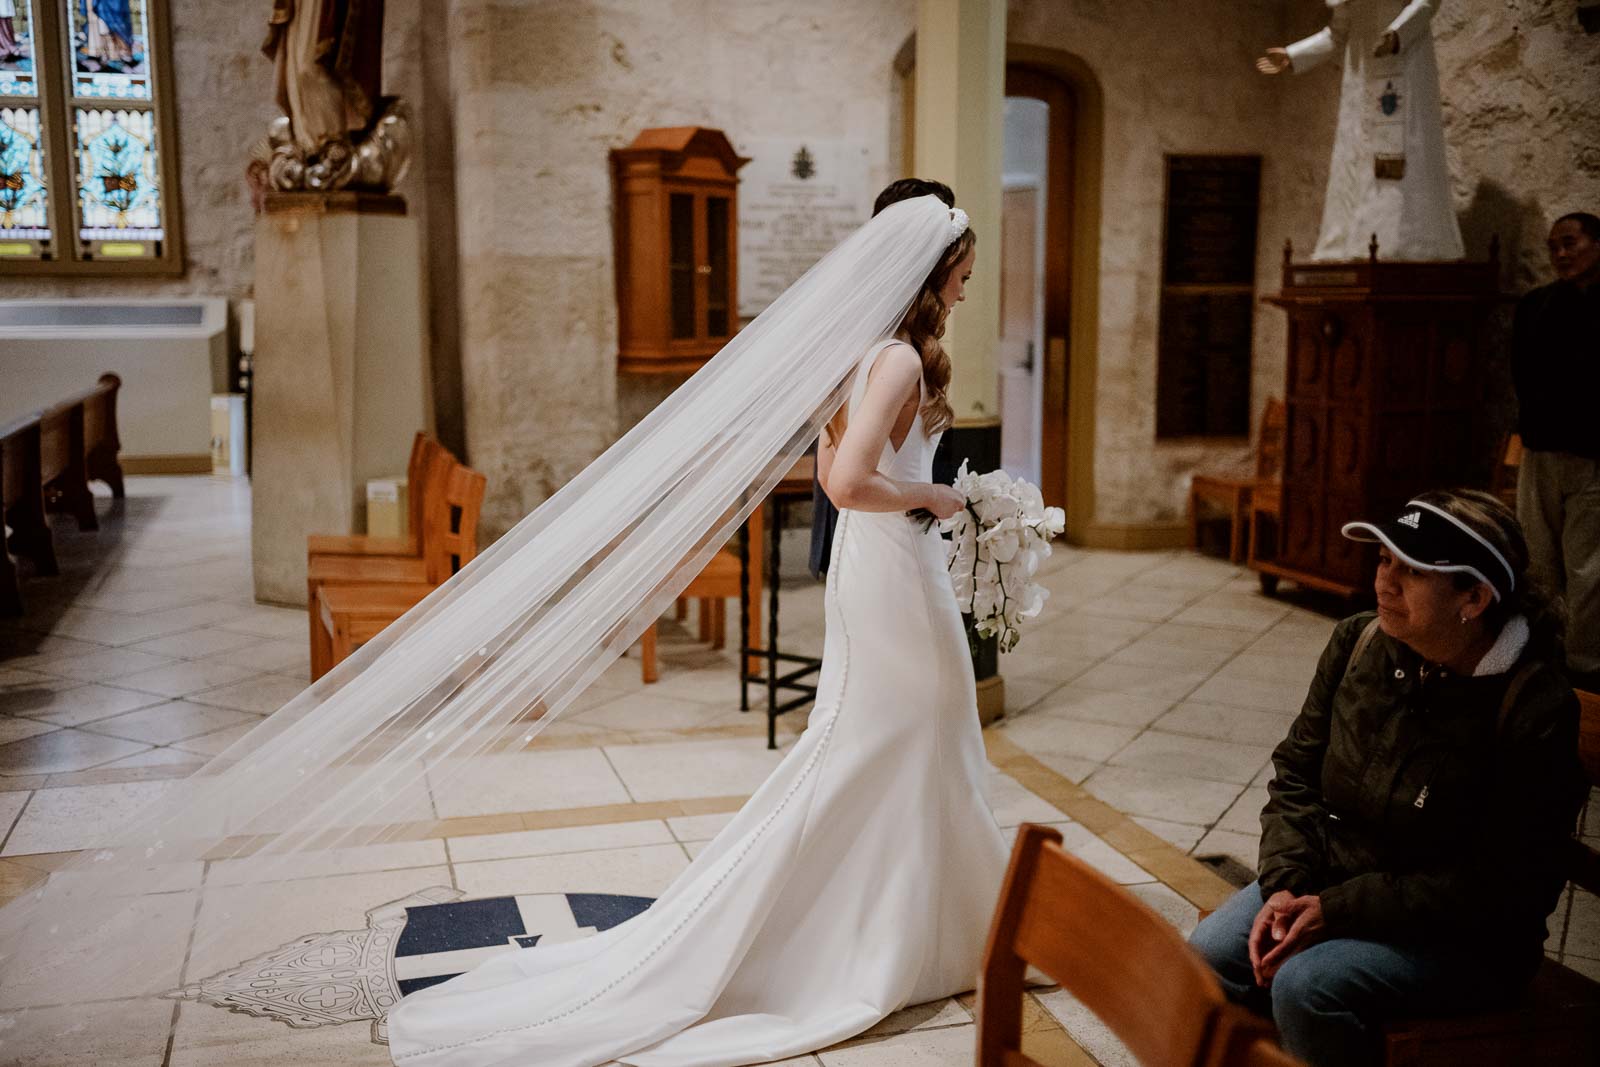 The brides veil stretching out behind her as the couple reach the end of church aisle